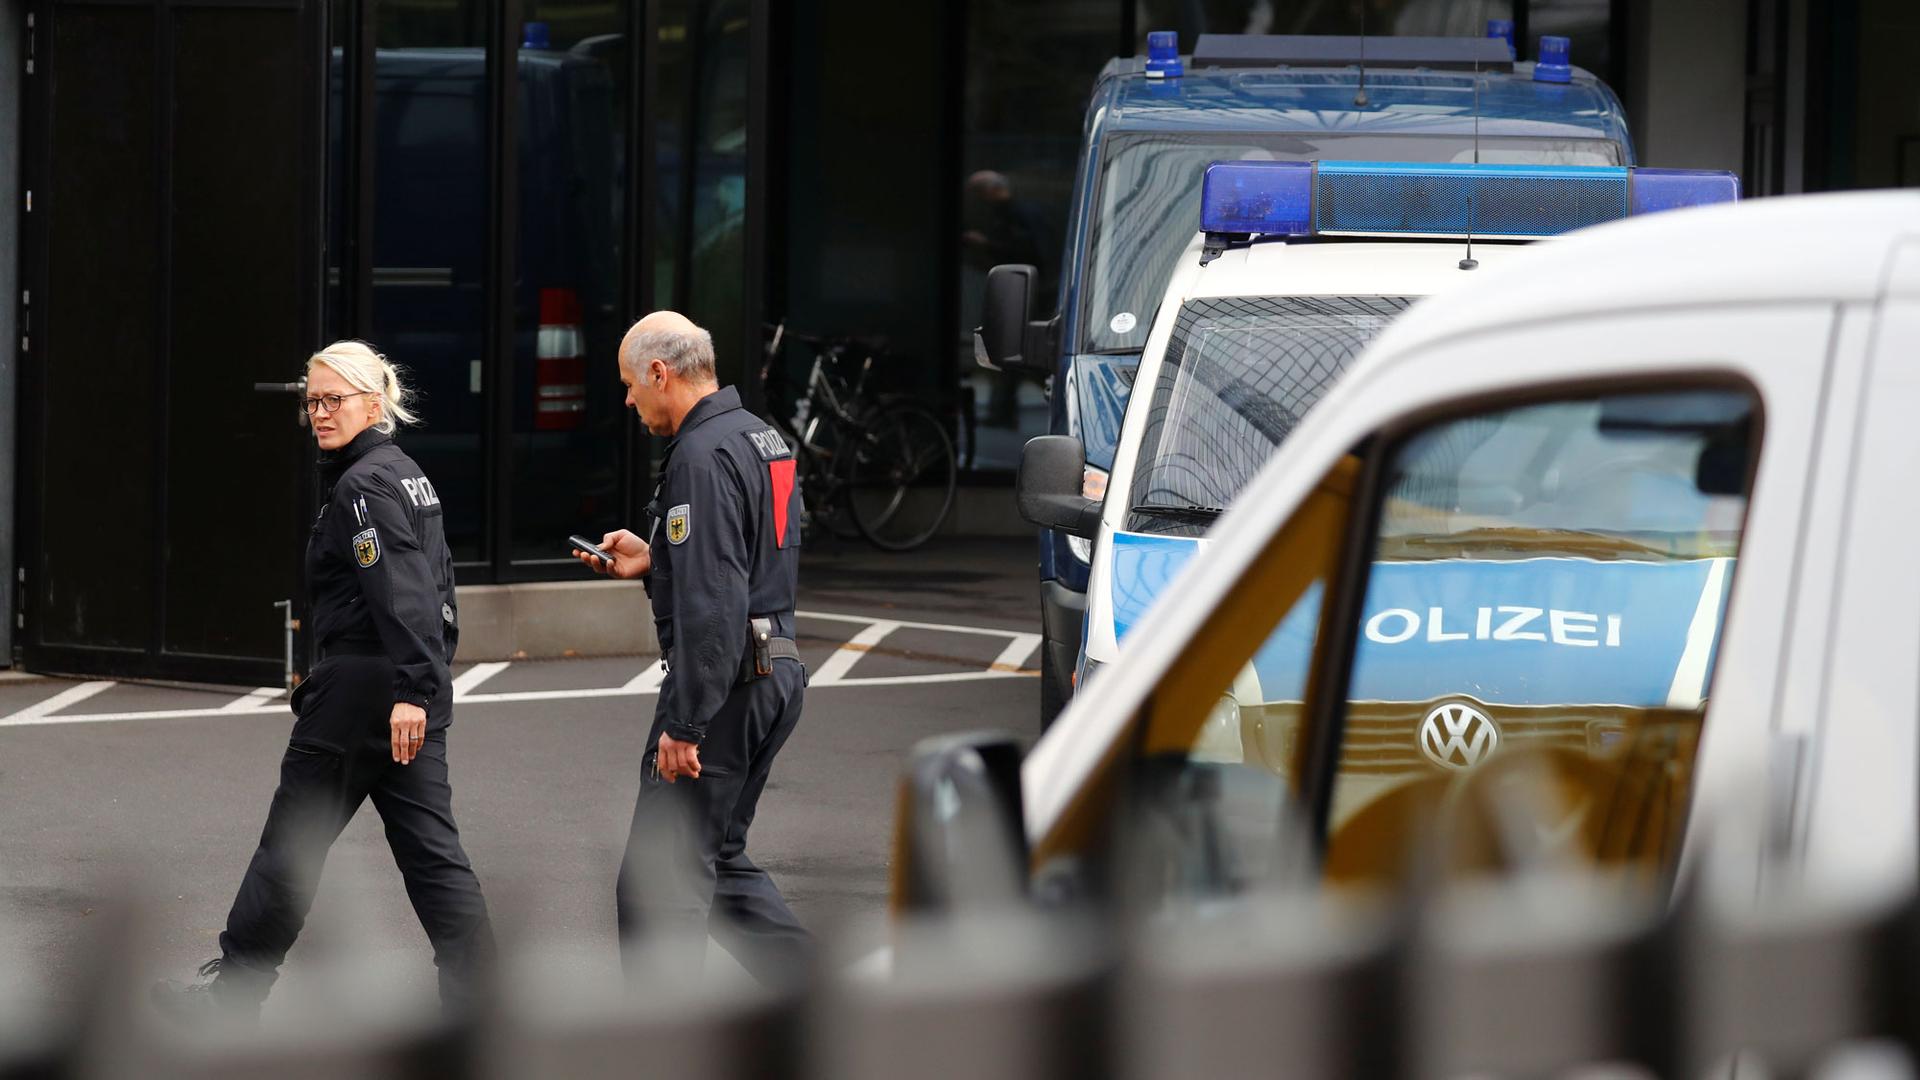 Two police officers are seen walking past police vehicles in front of Deutsche Bank headquarters in Frankfurt, Germany, Nov. 29, 2018.